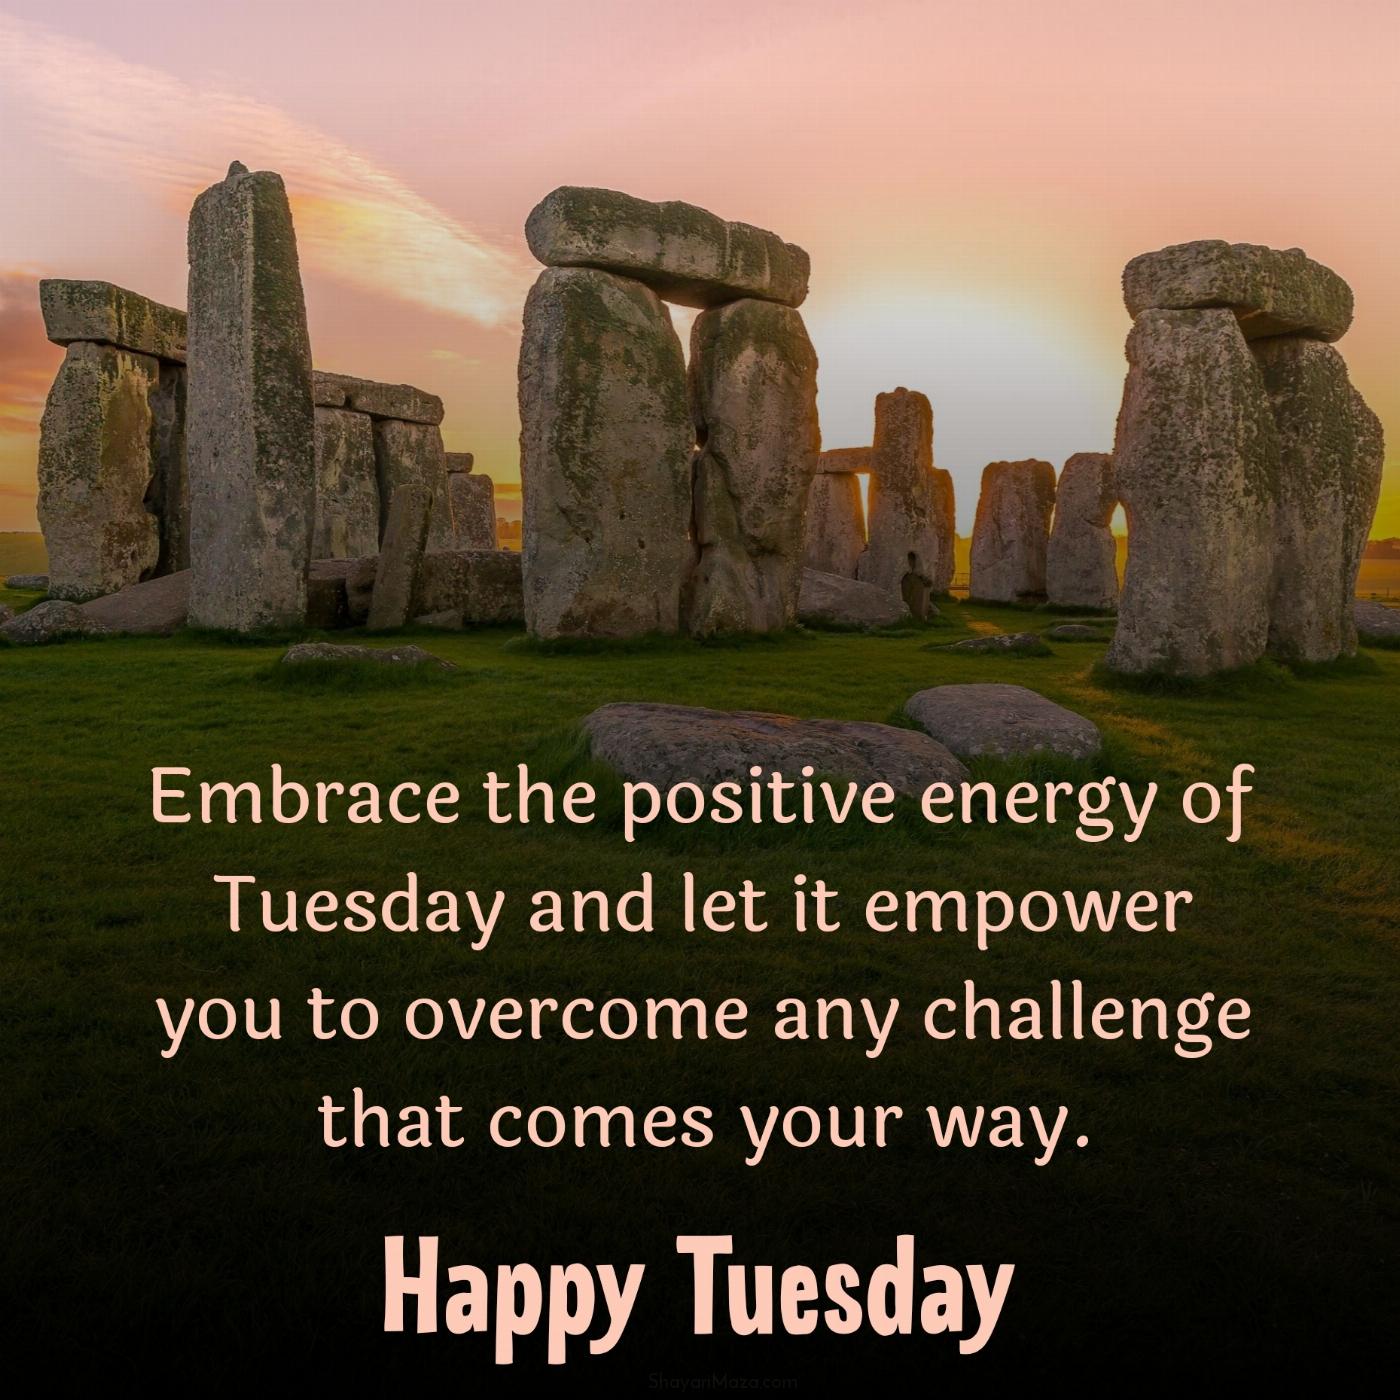 Embrace the positive energy of Tuesday and let it empower you